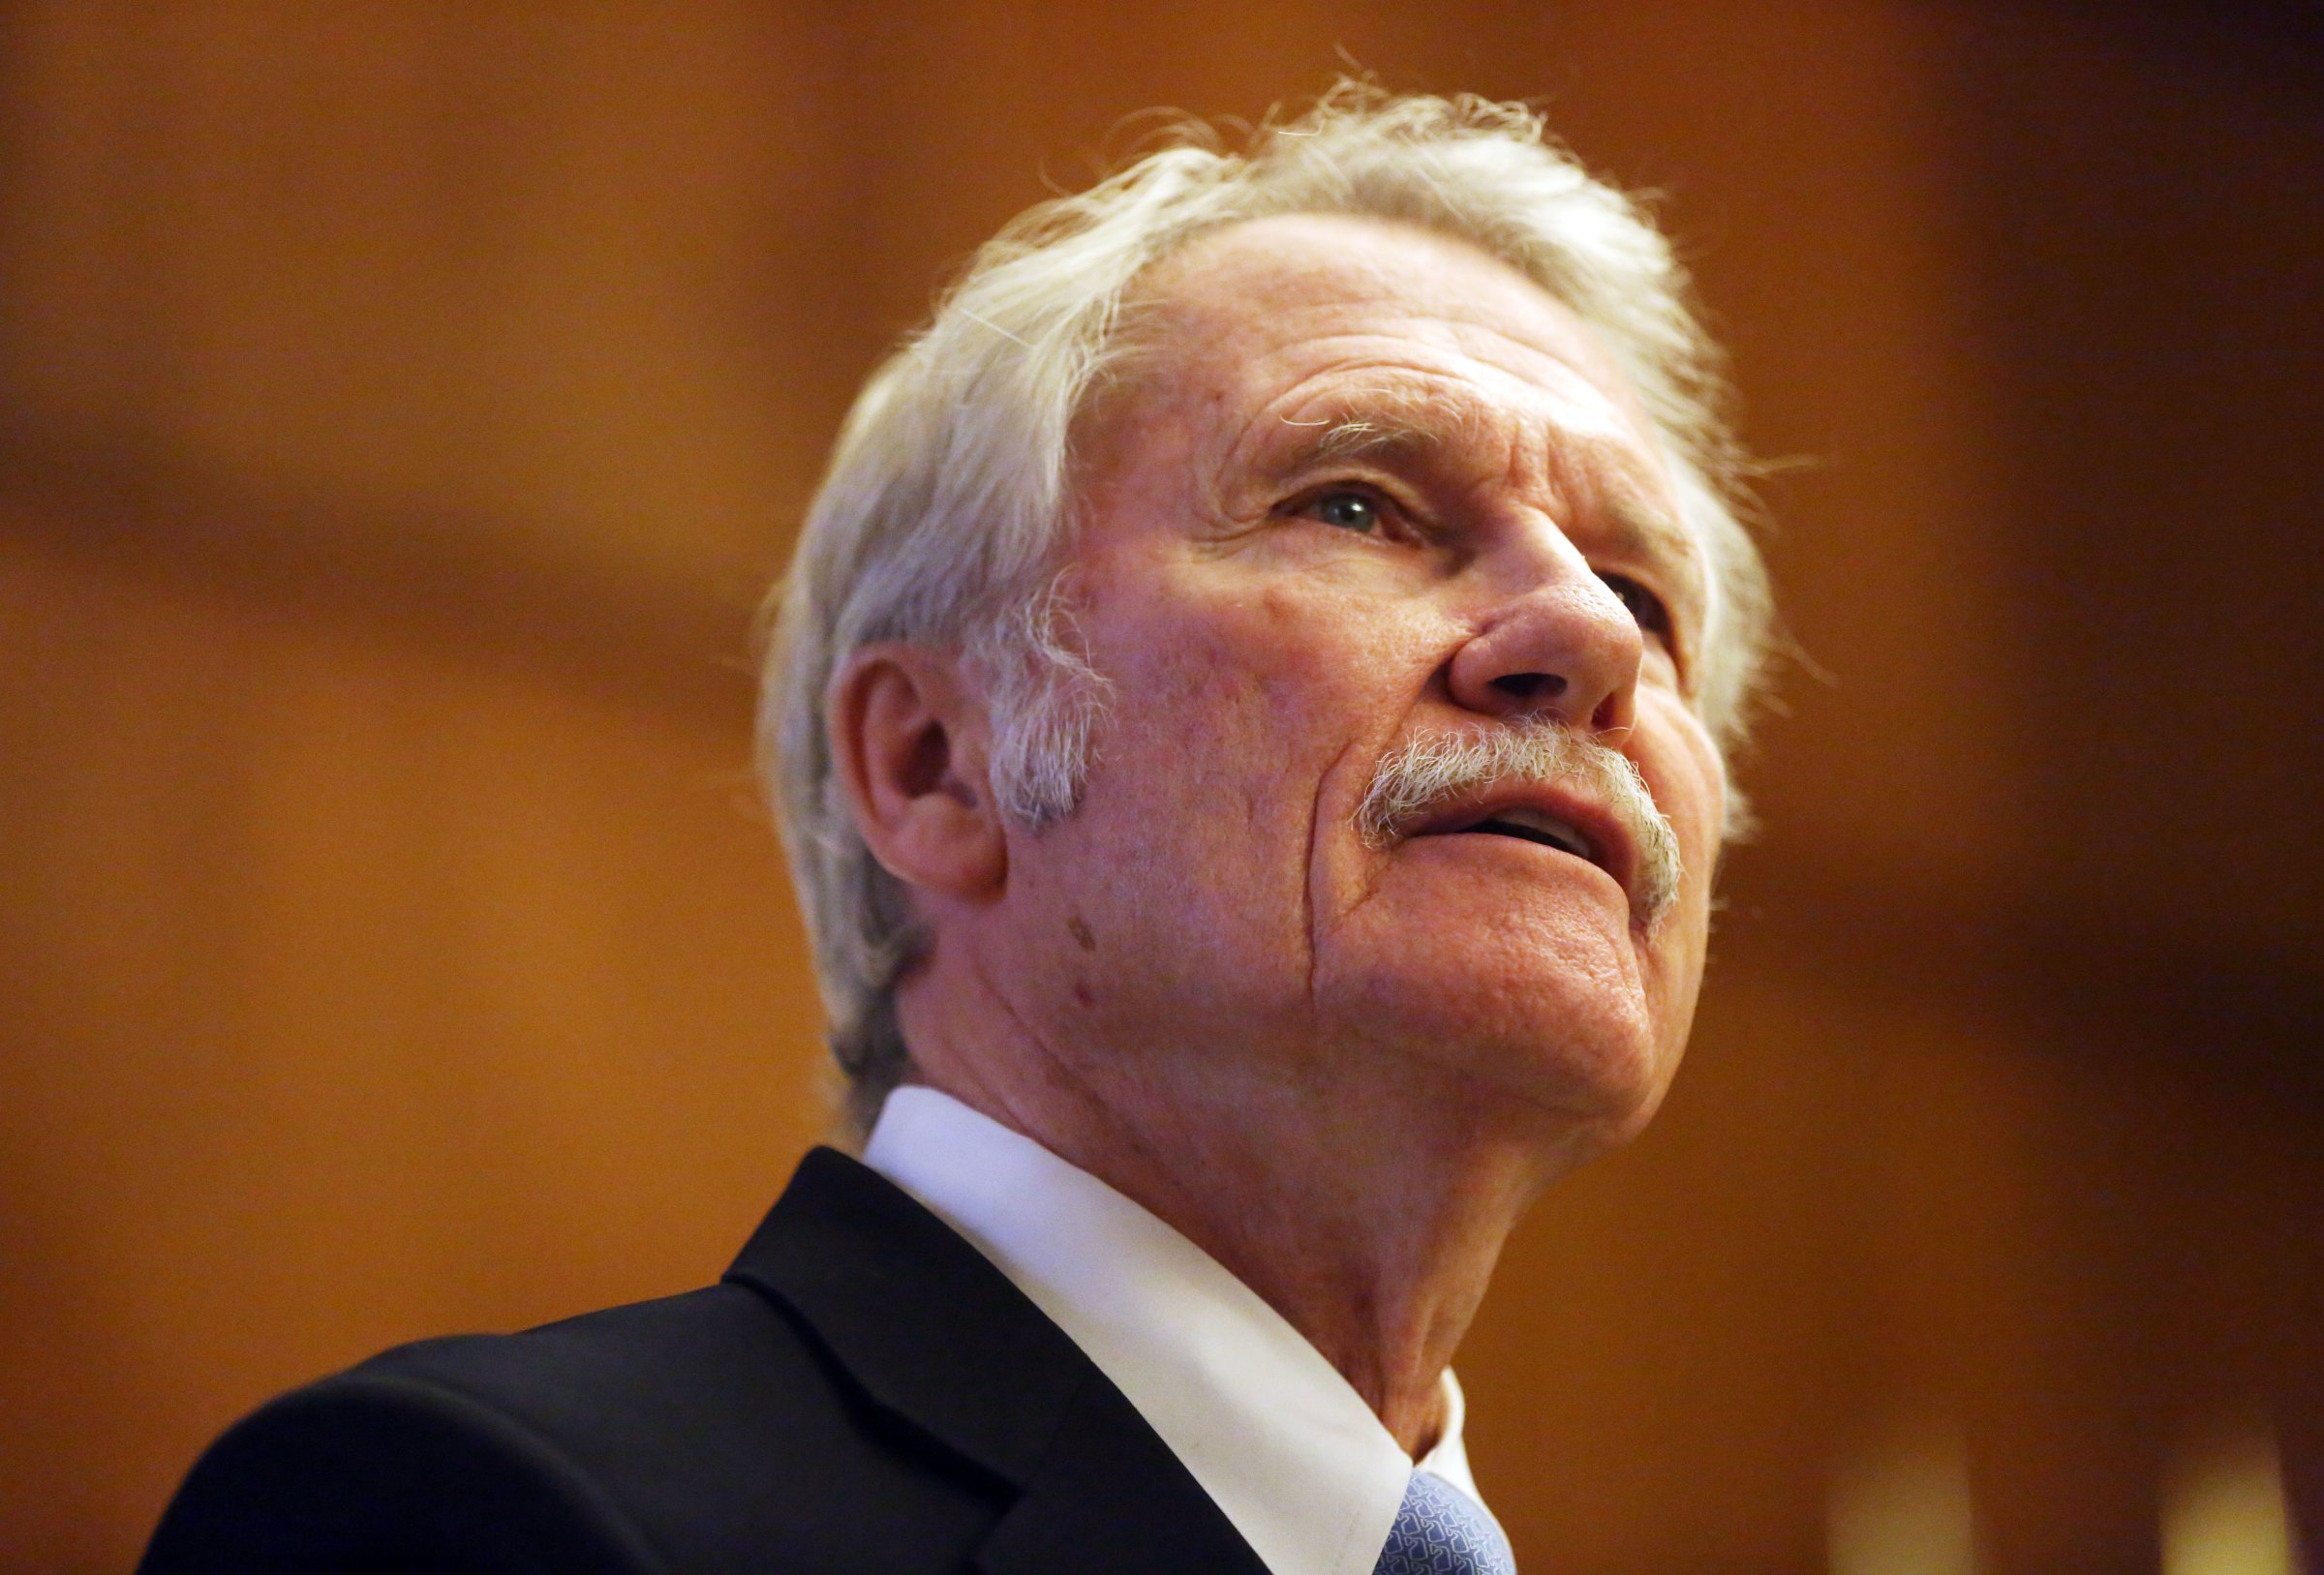 Gov. John Kitzhaber speaks to the media as he presents his two-year state budget proposal from his ceremonial office at the State Capitol in Salem, Ore., on Dec. 1, 2014.